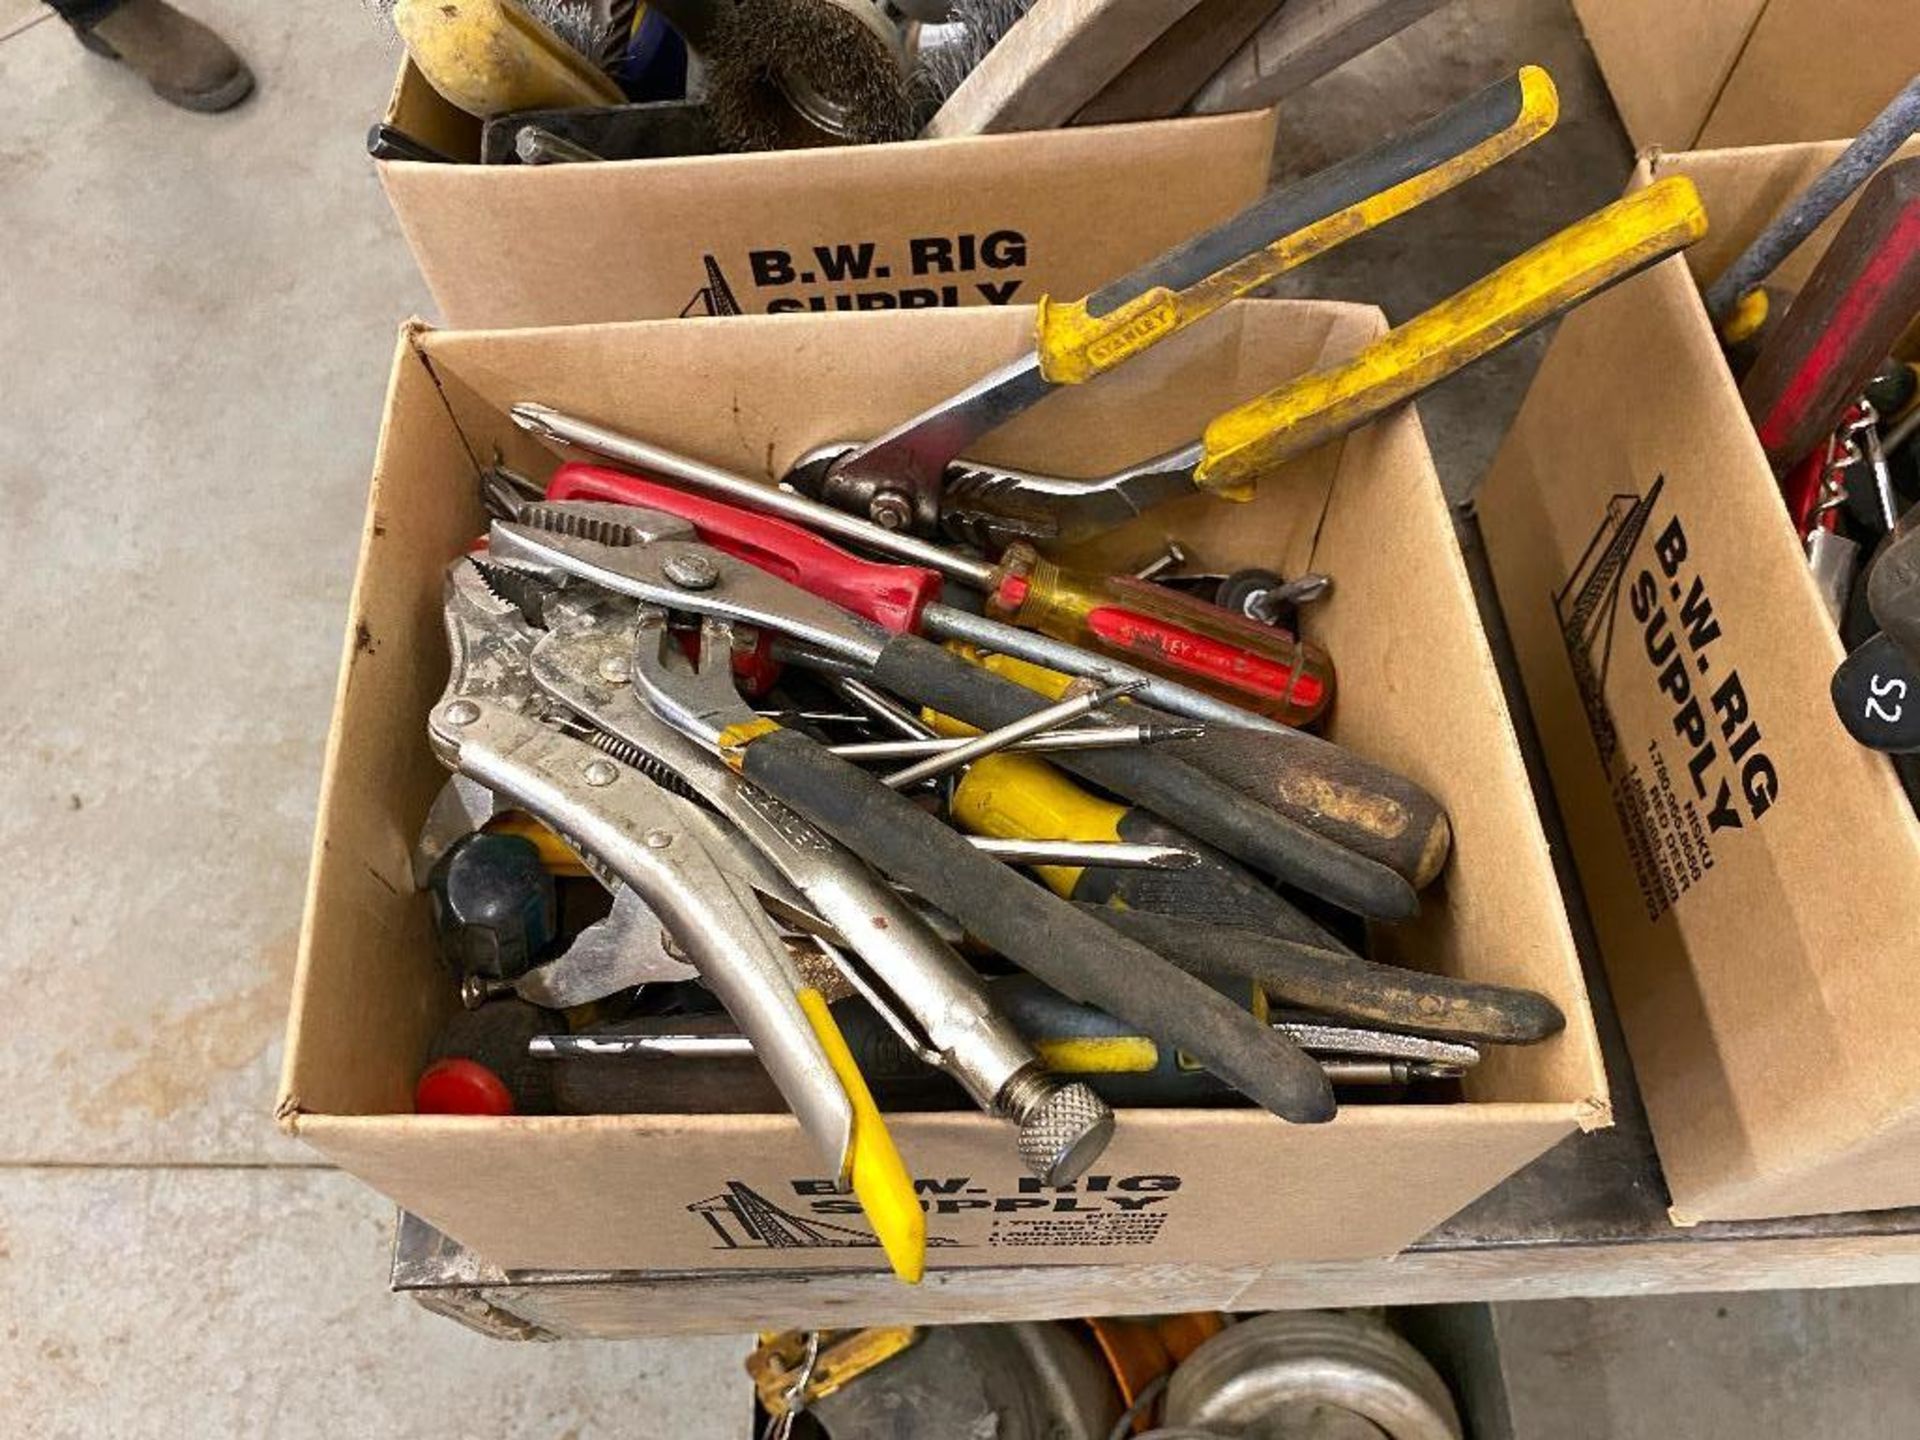 Lot of Asst. Hand Tools including Vice Grips, Screwdrivers, etc. - Image 4 of 4